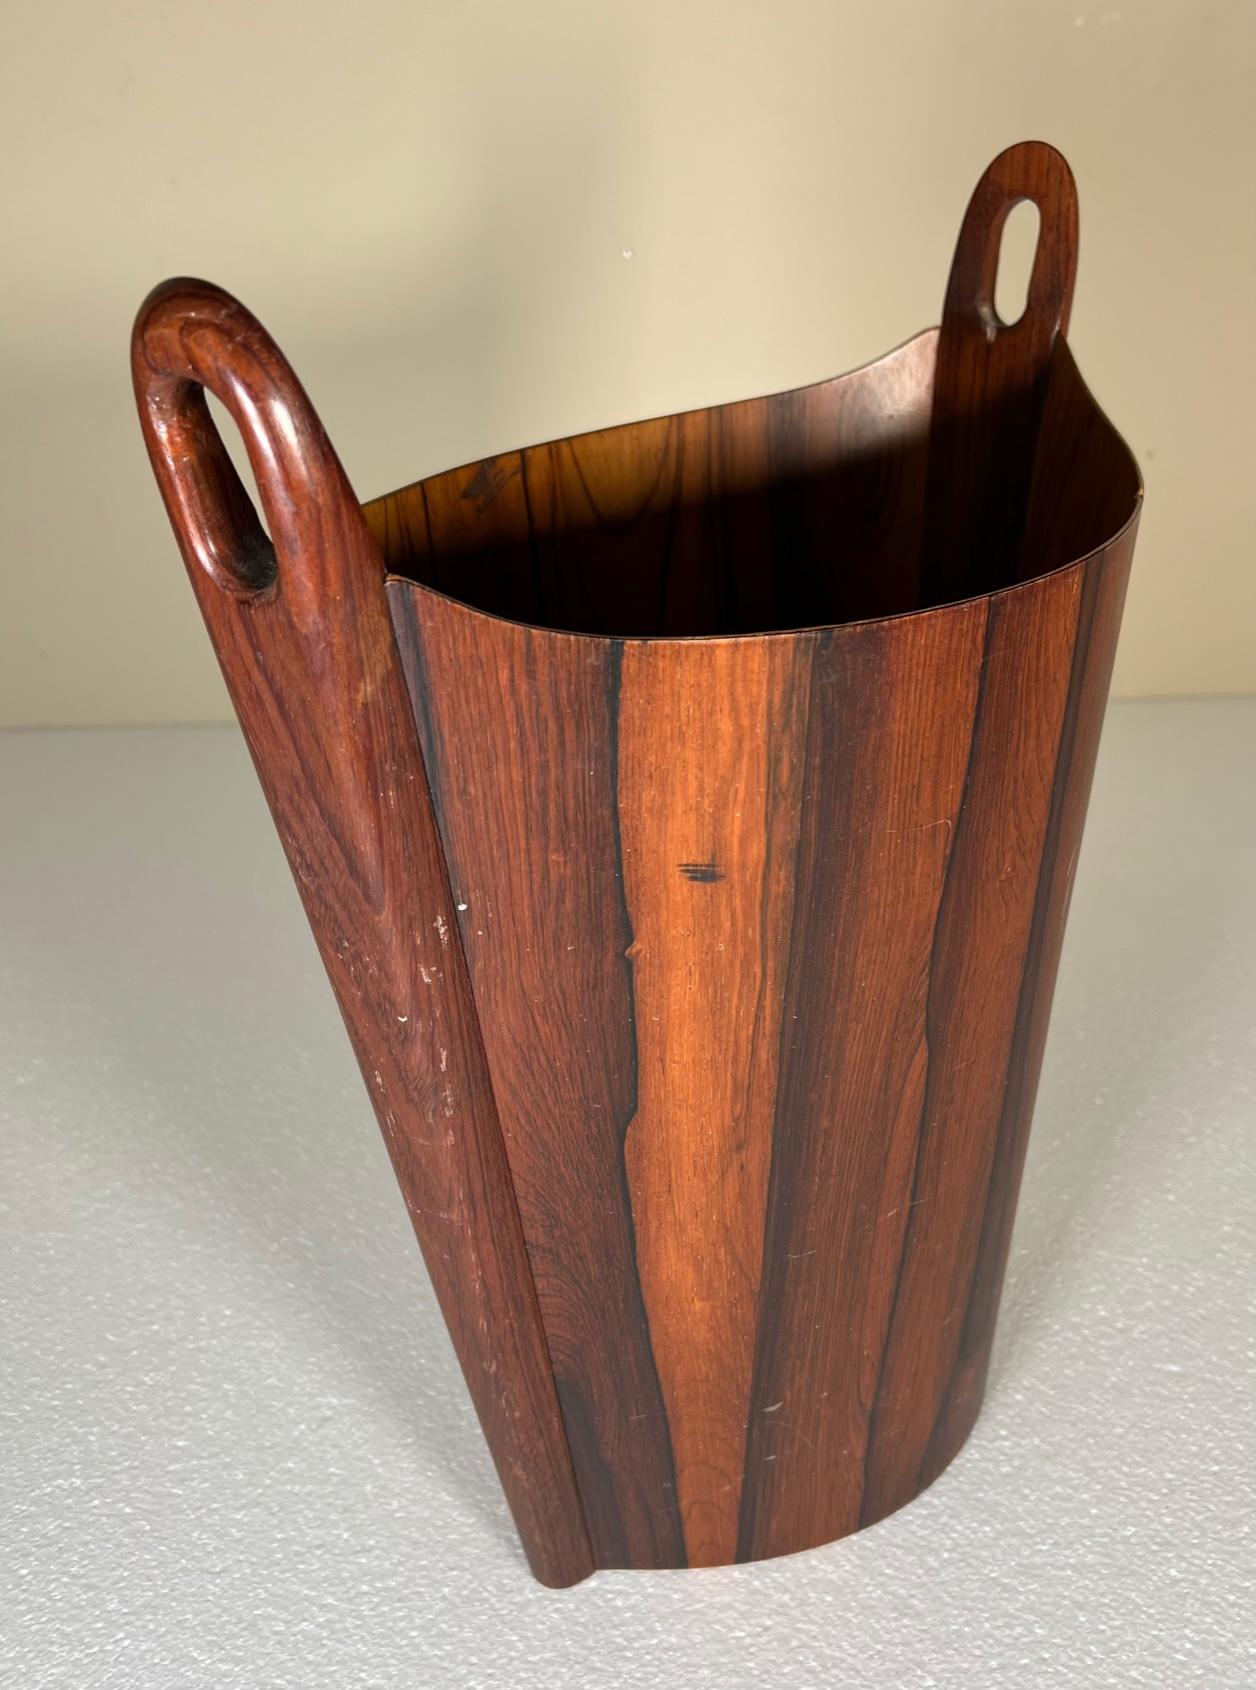 Danish Modern rosewood paper waste basket by Einar Barnes for PS Heggen. Faint stamp inside. Very good condition. Some marks, scuffs, paint marks. Small chips on edge. Still looks amazing.
Dimensions 15.5